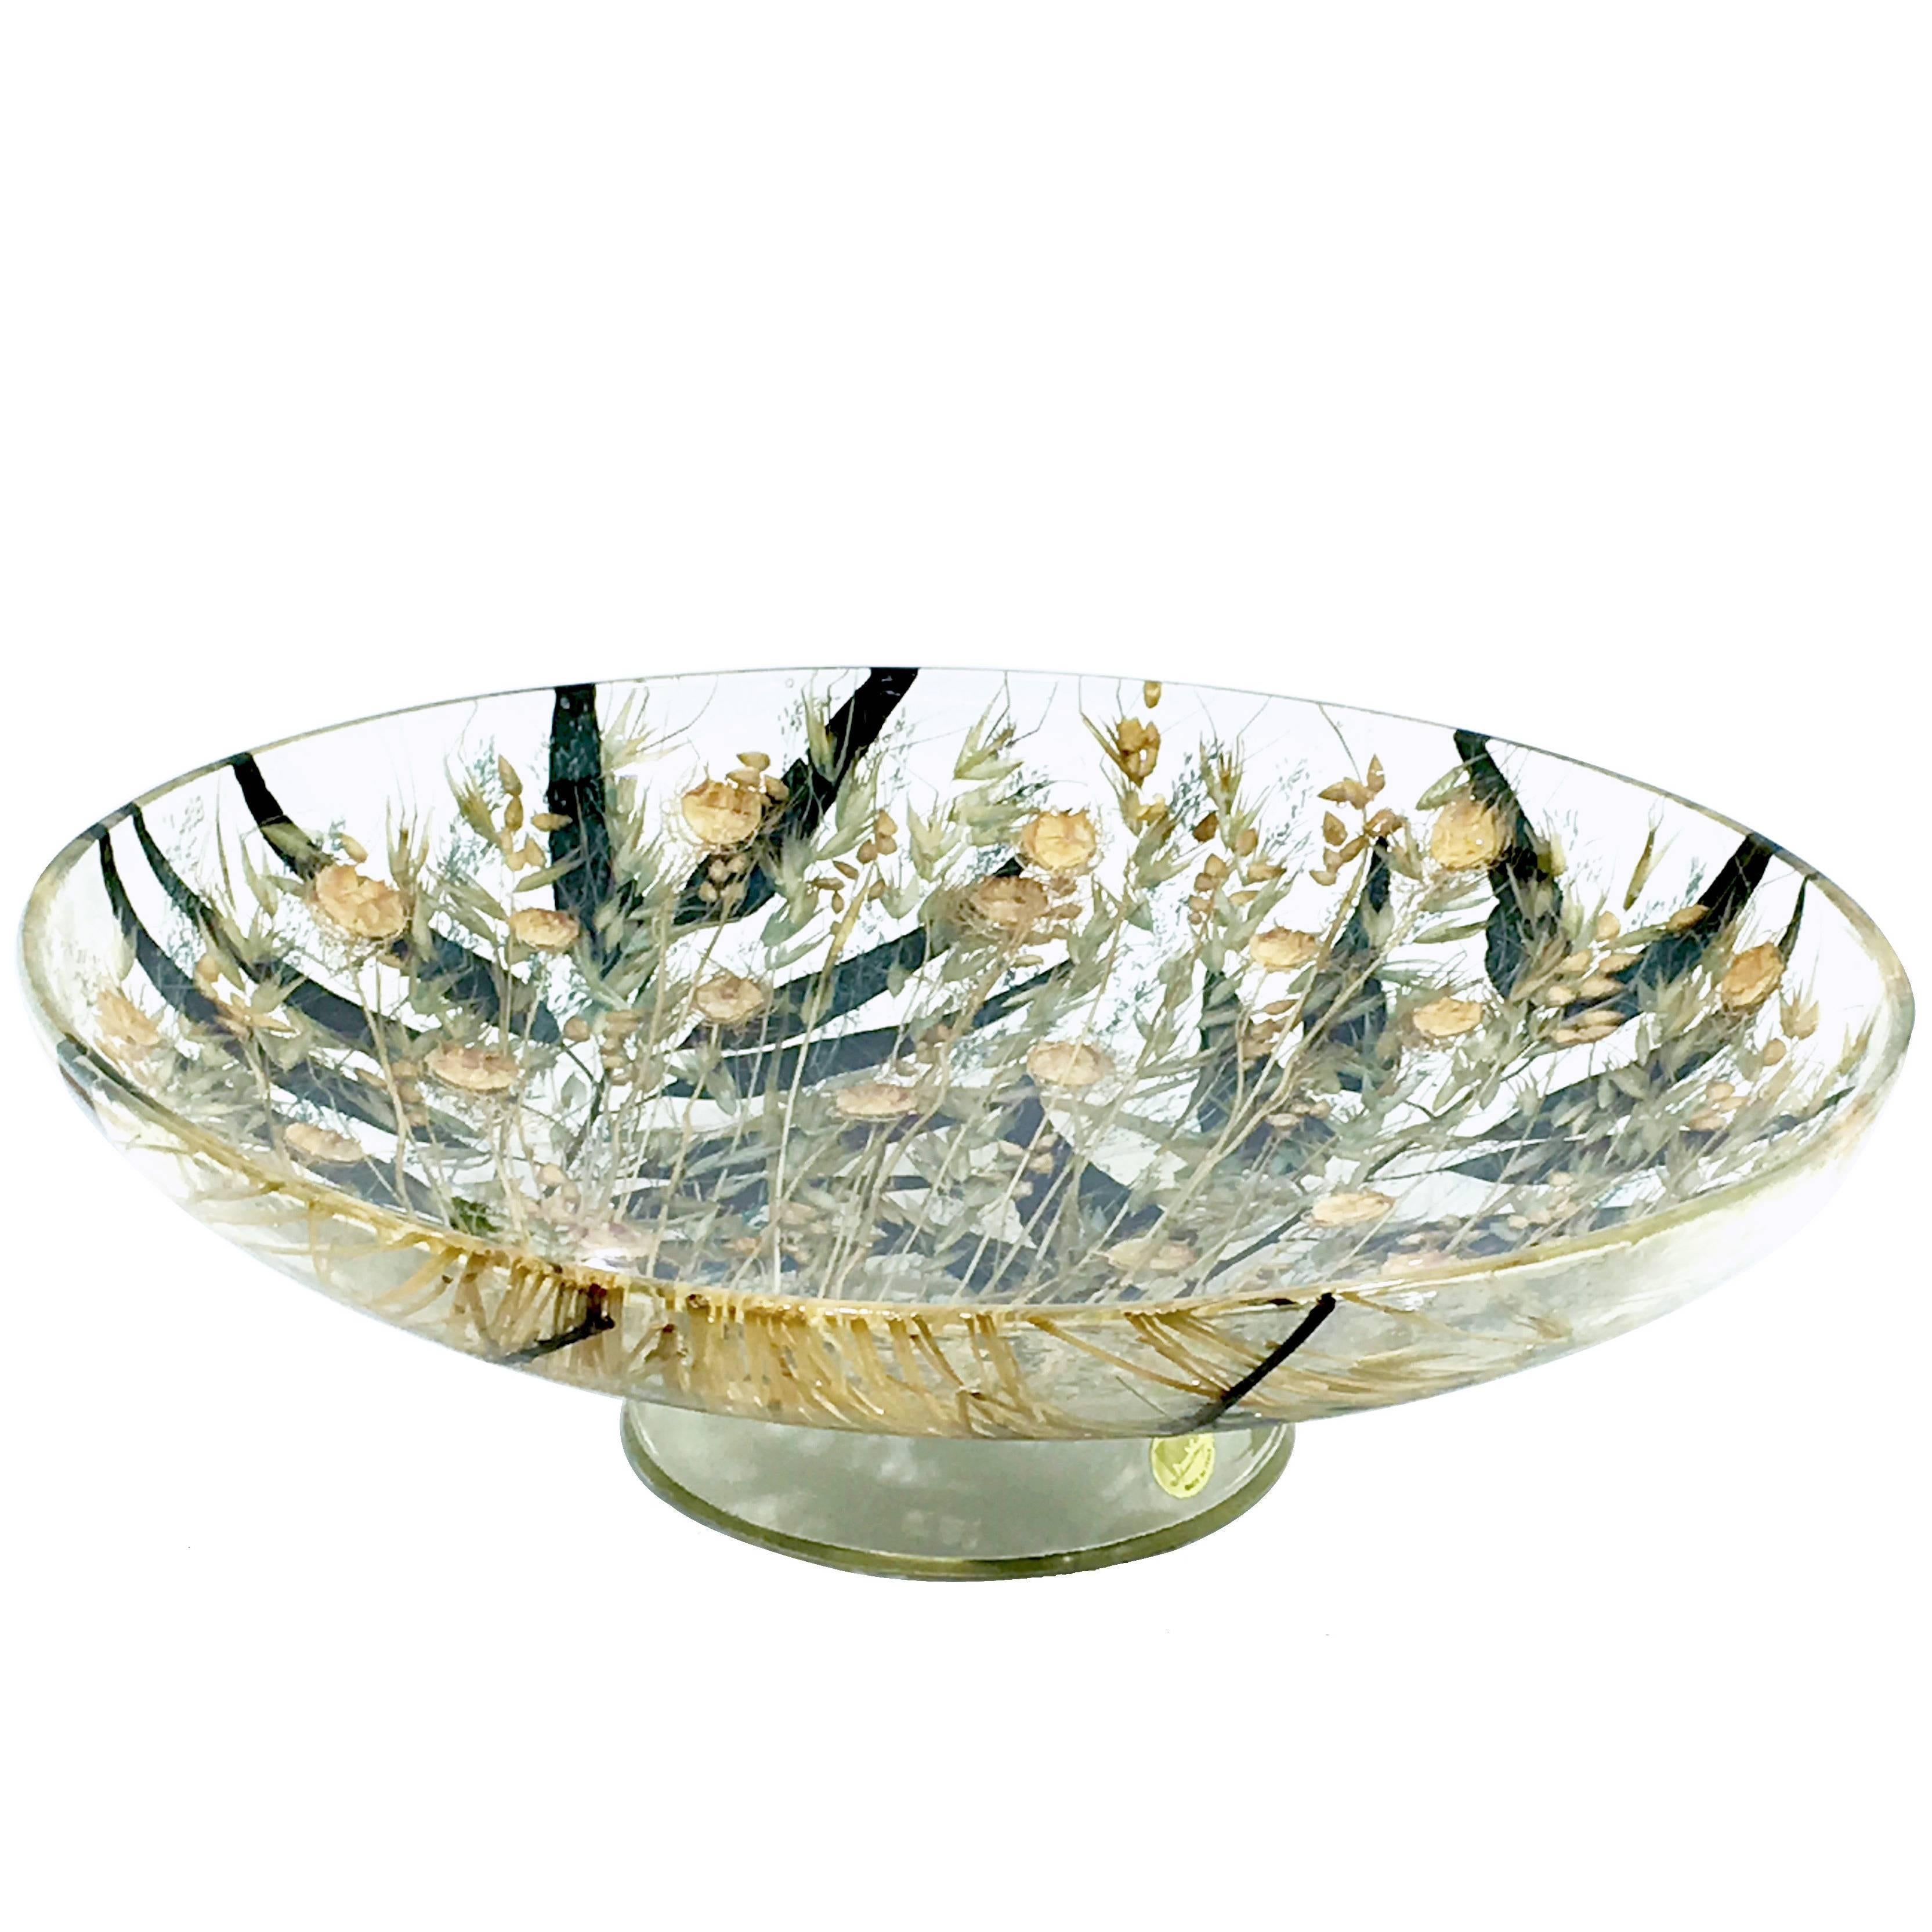 Decorative Plexiglass Bowl or Basket with Wheat Inclusions For Sale